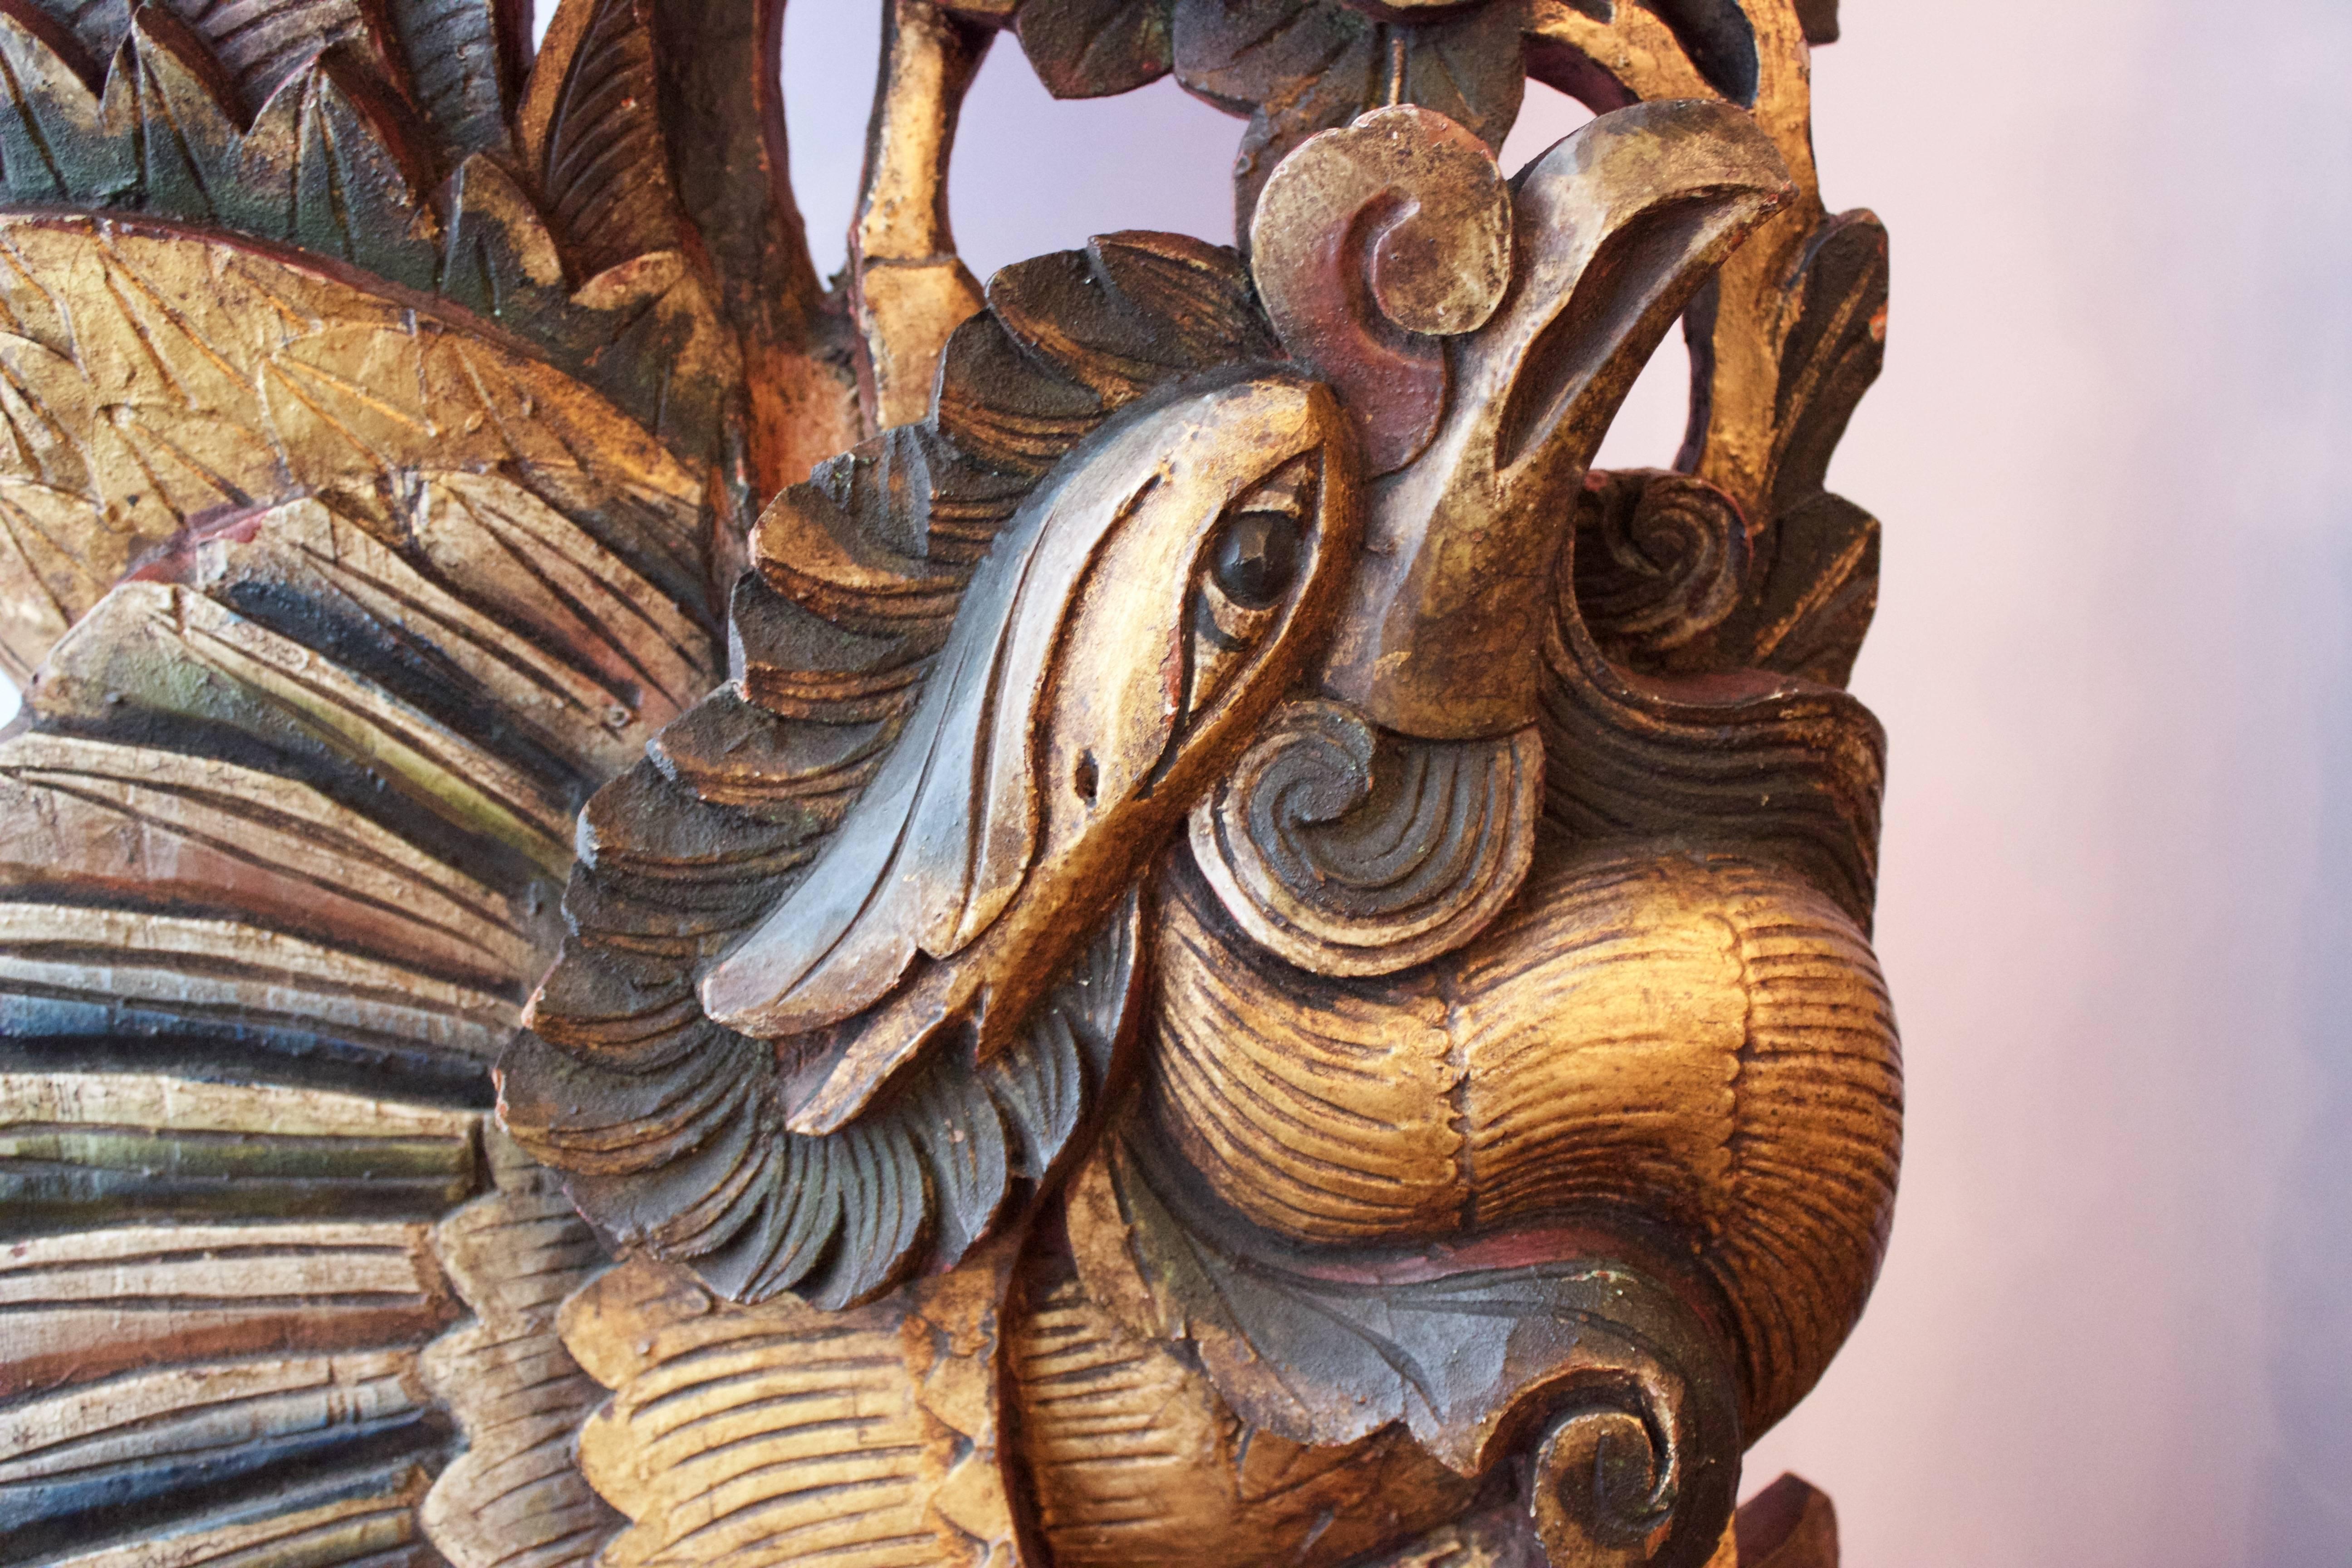 This pair of colorful and extraordinary roosters were hand-carved from single wood blocks, gilded and painted as Architectural elements of homes. Each rooster, surrounded by flowers and leaves shows-off its polychrome magnificent feathers and sort